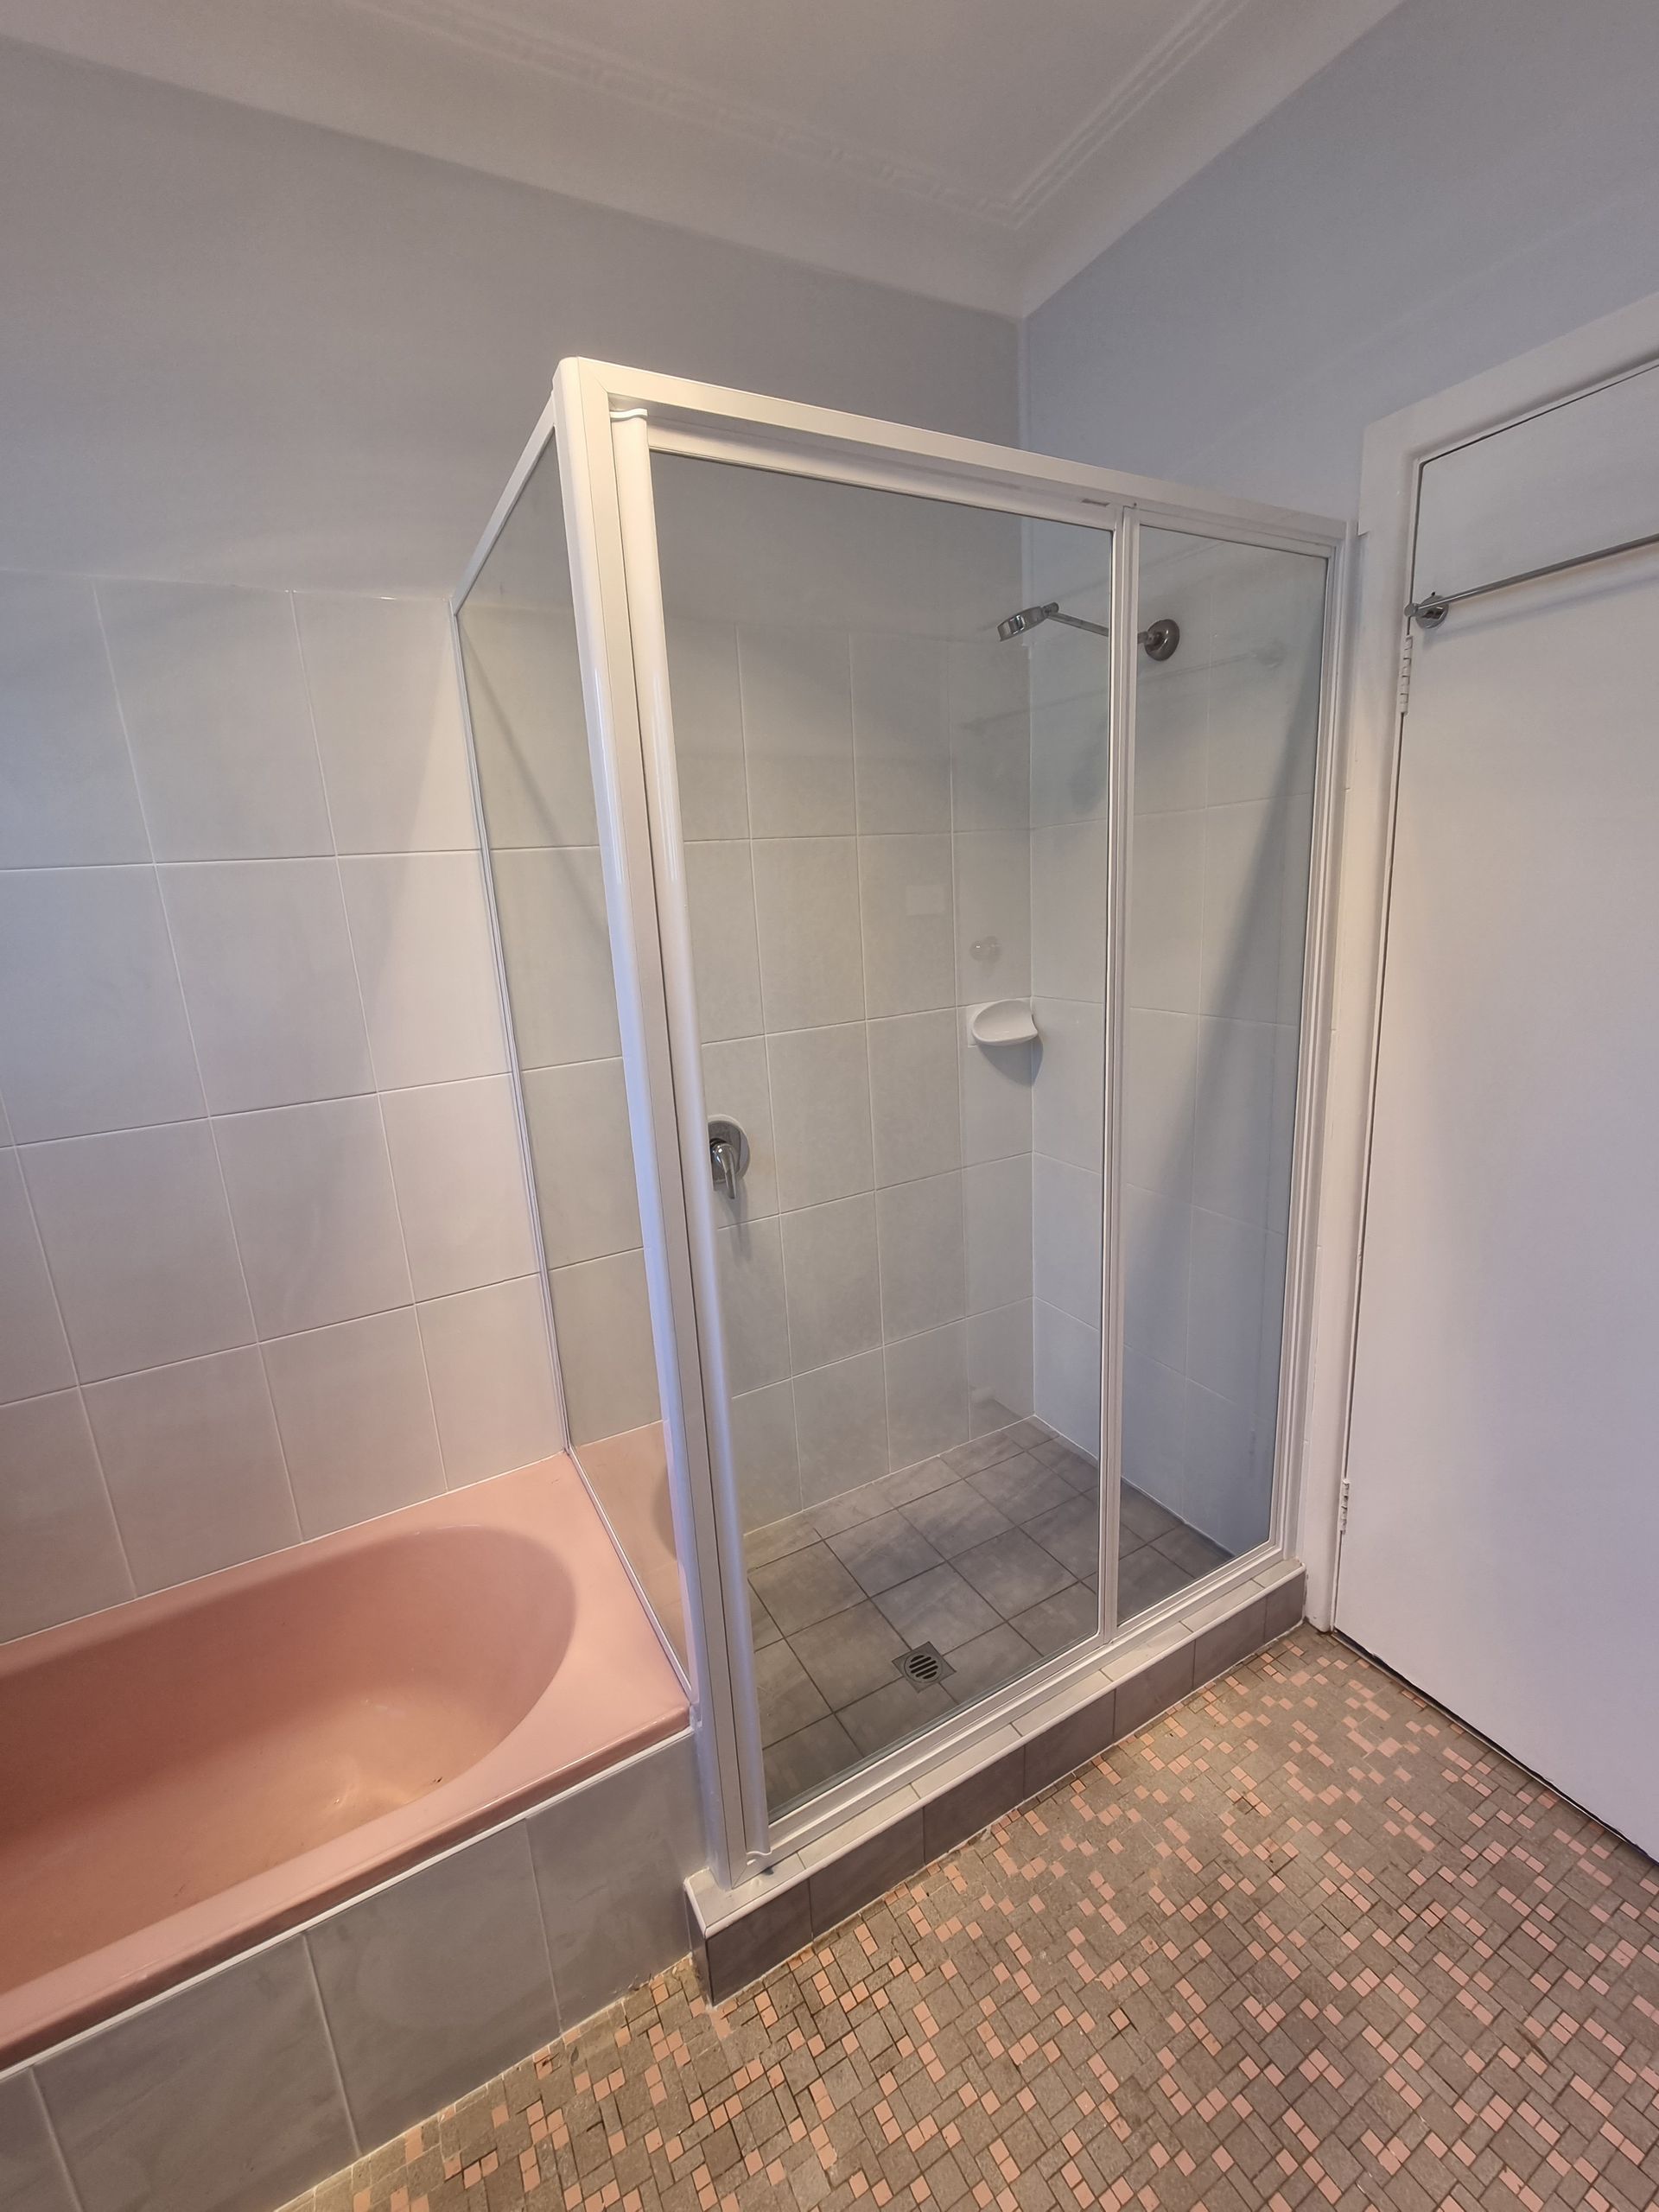 Semi-Framed Glass Shower Screen with Decorative Tiling — Glass in Wollongong, NSW